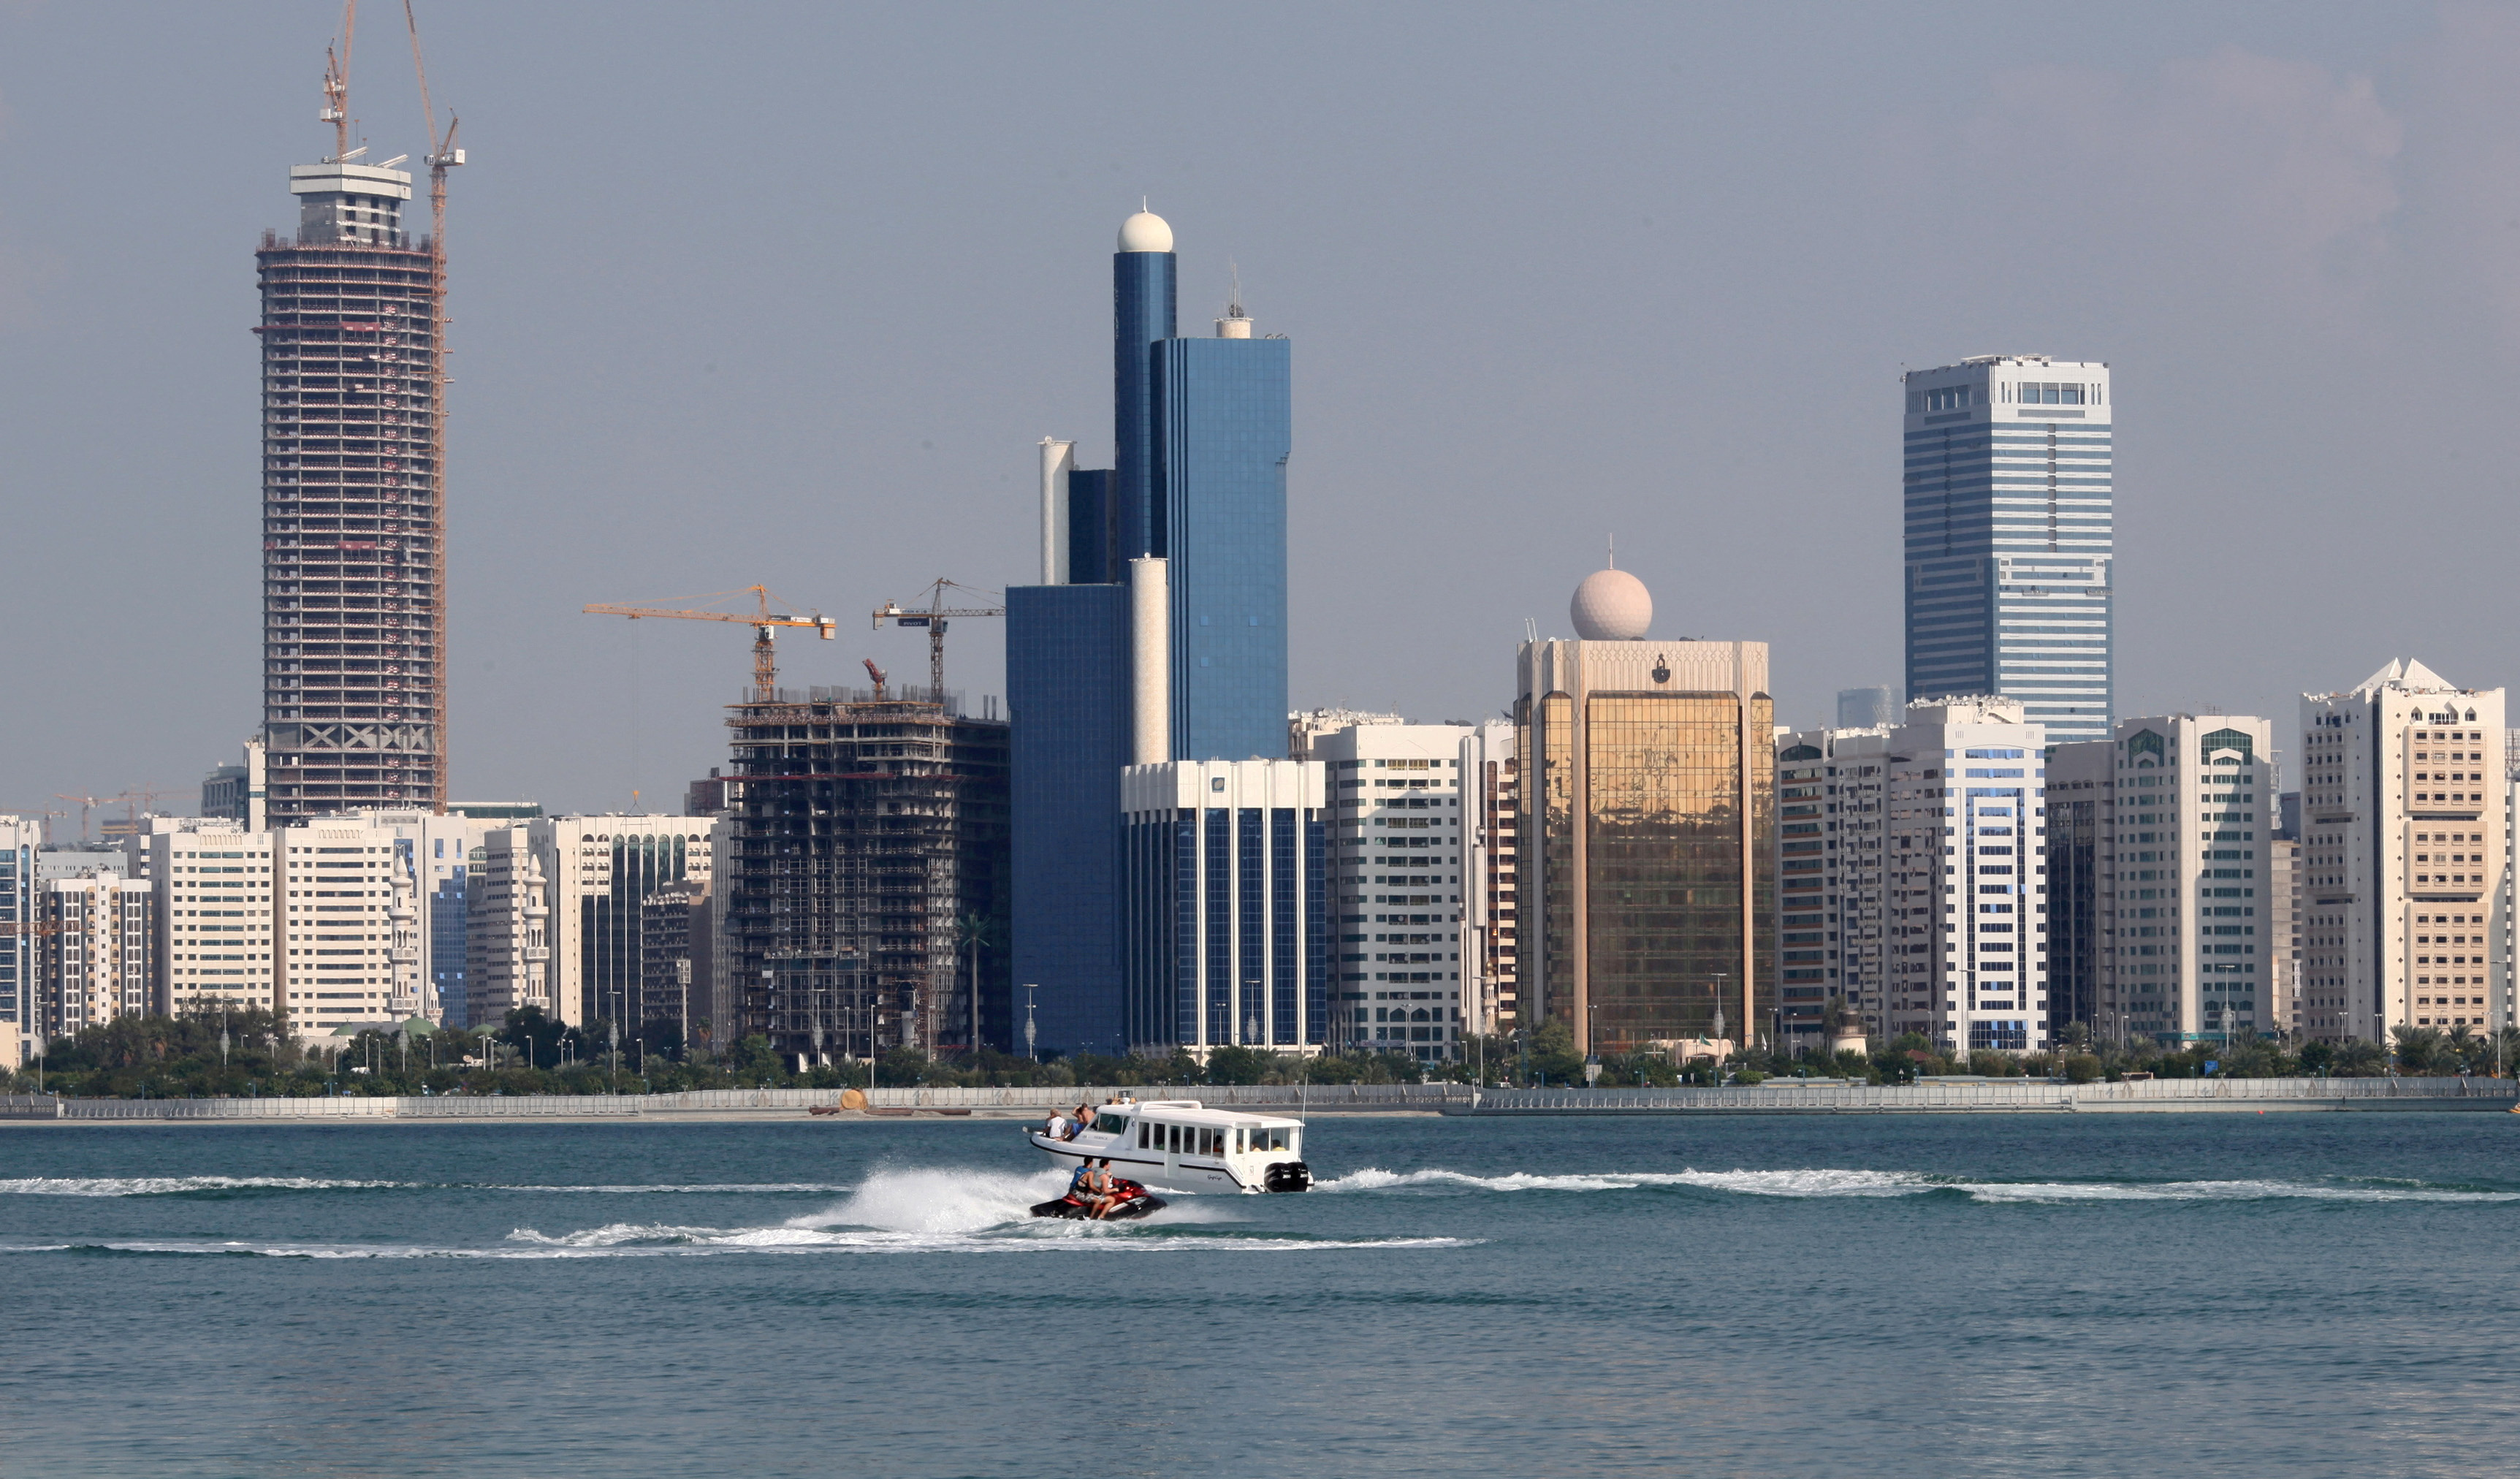 A general view of the Abu Dhabi skyline